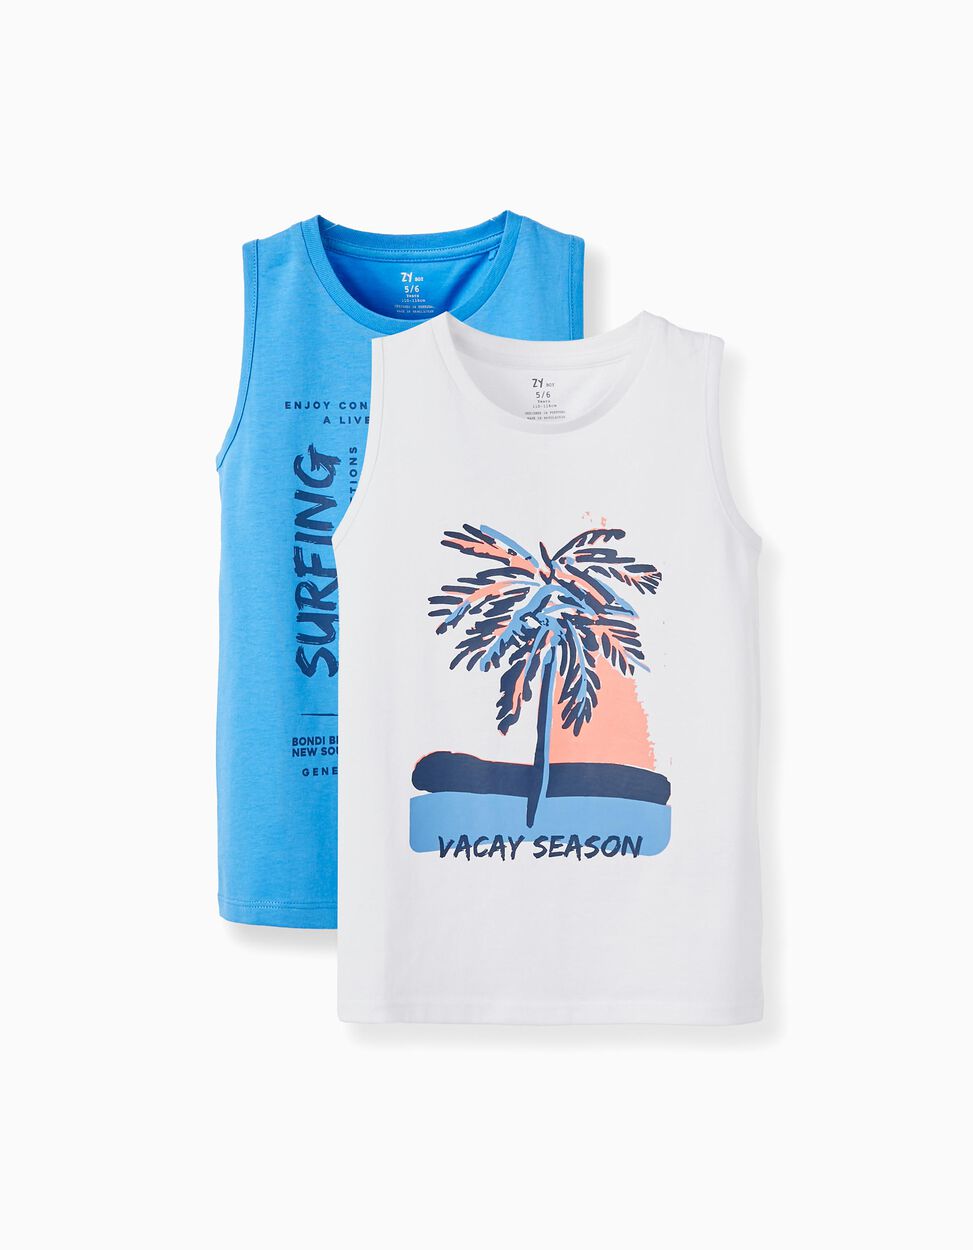 Buy Online 2 Sleeveless Cotton T-shirts for Boys 'Vacay', Blue/White